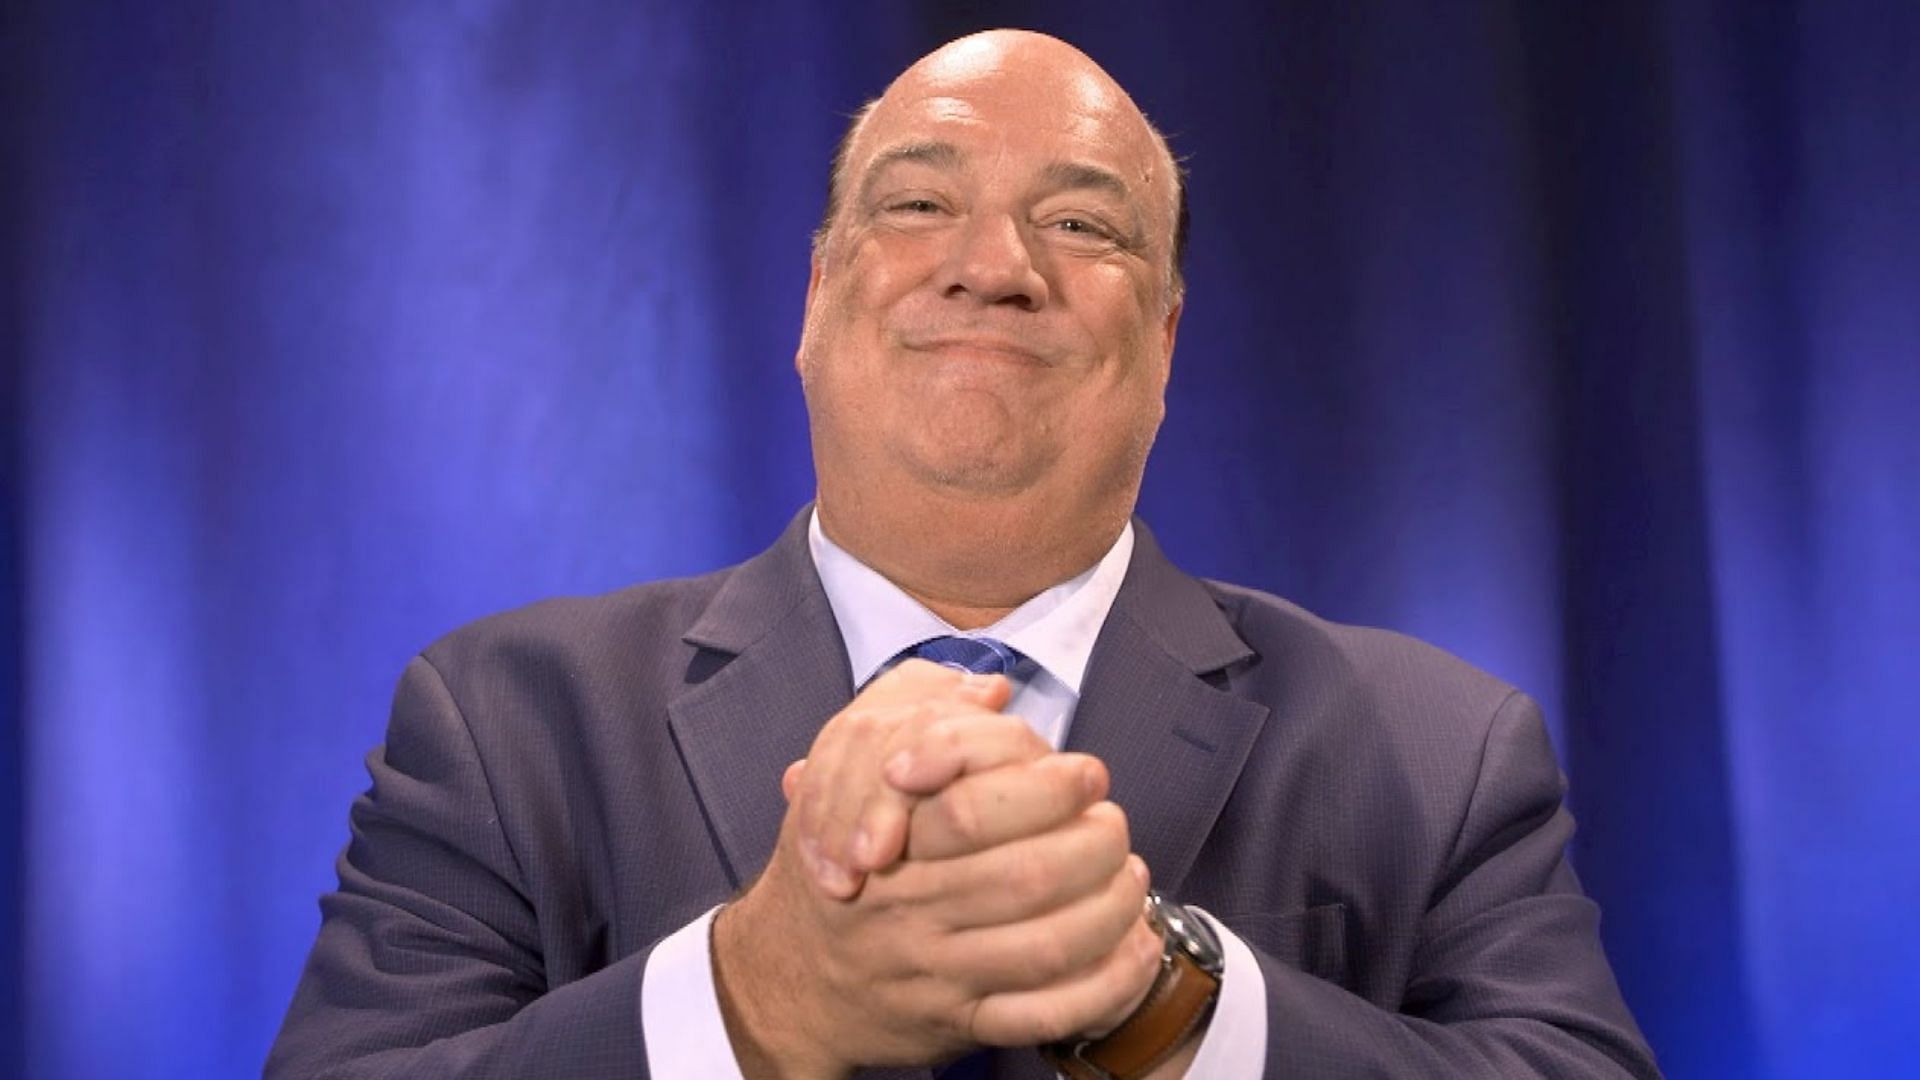 Paul Heyman is the special counsel for Roman Reigns